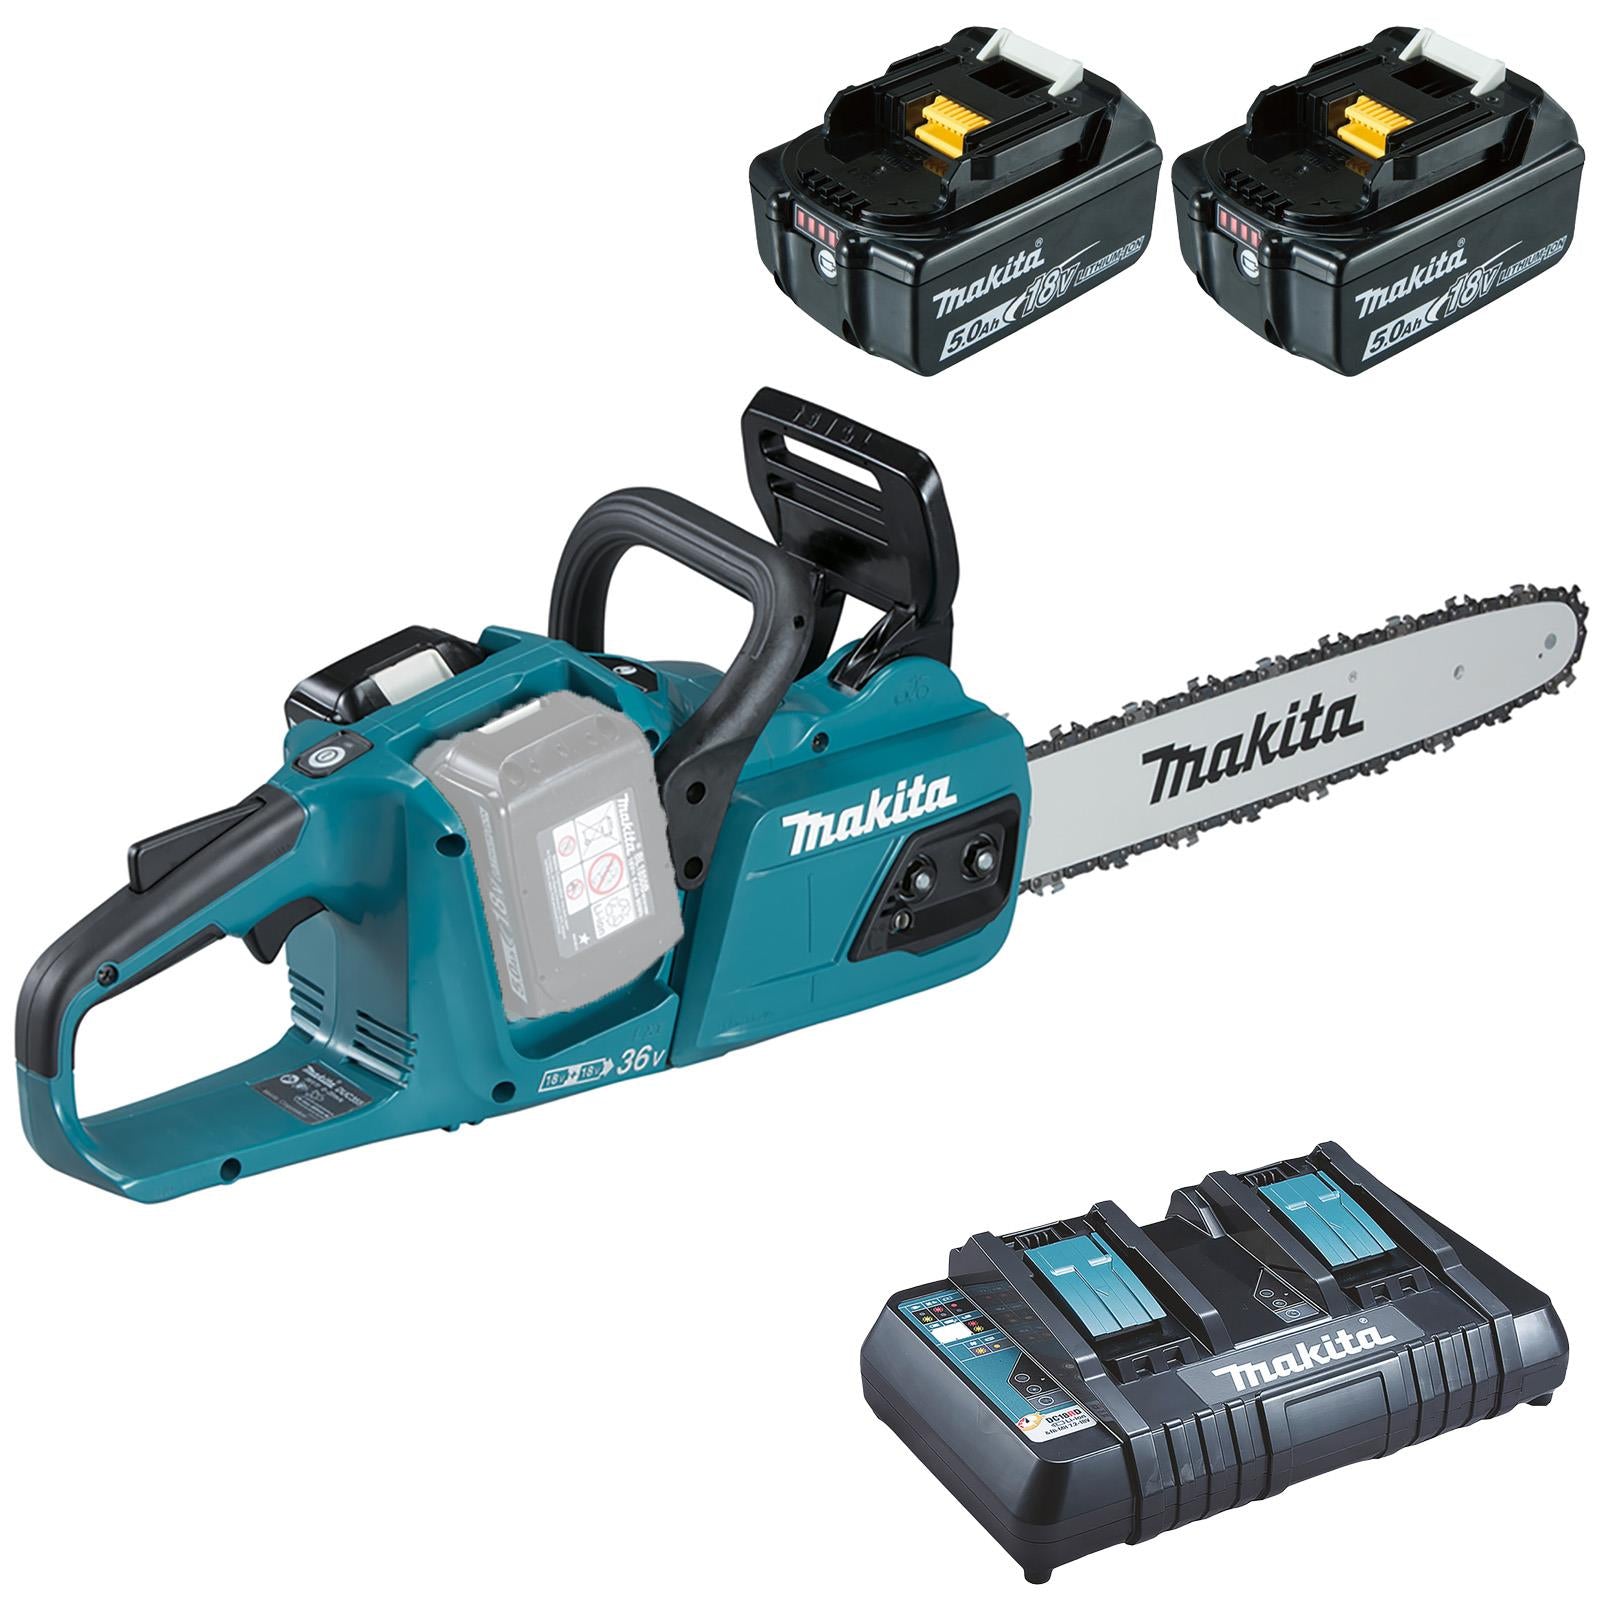 Makita Chainsaw Kit Heavy Duty 35cm 14" 18V x 2 LXT Brushless Cordless 2 x 5Ah Battery and Dual Rapid Charger Garden Tree Cutting Pruning DUC355PT2